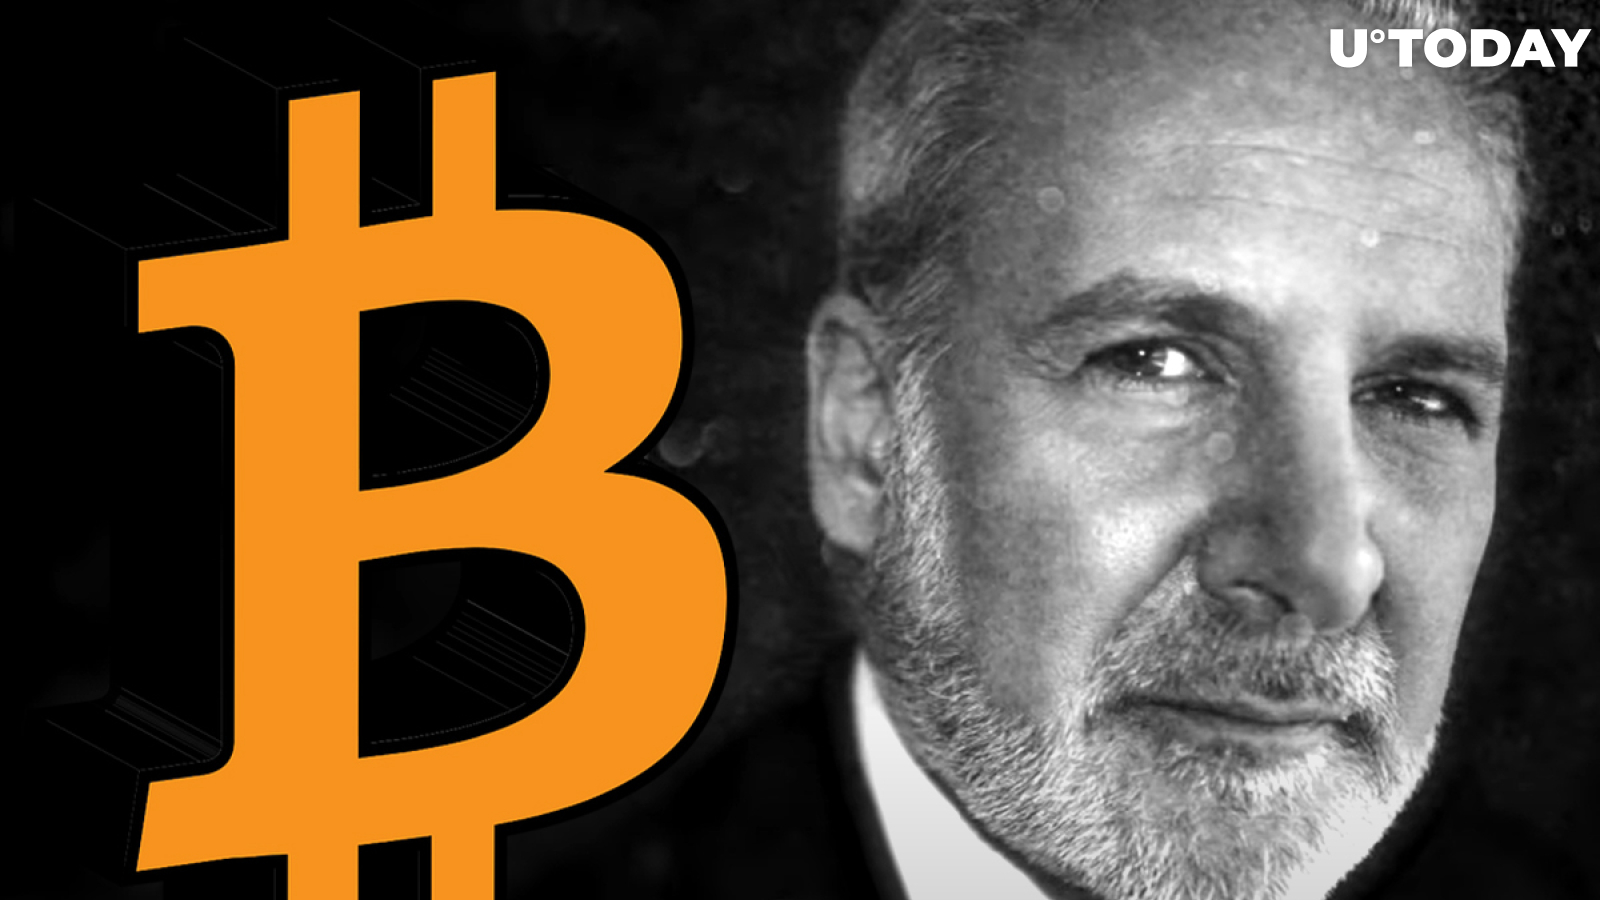 Bitcoin Replacing Gold as Hedge, as CNBC Claims, Is “Very Bullish Sign” for Gold: Peter Schiff